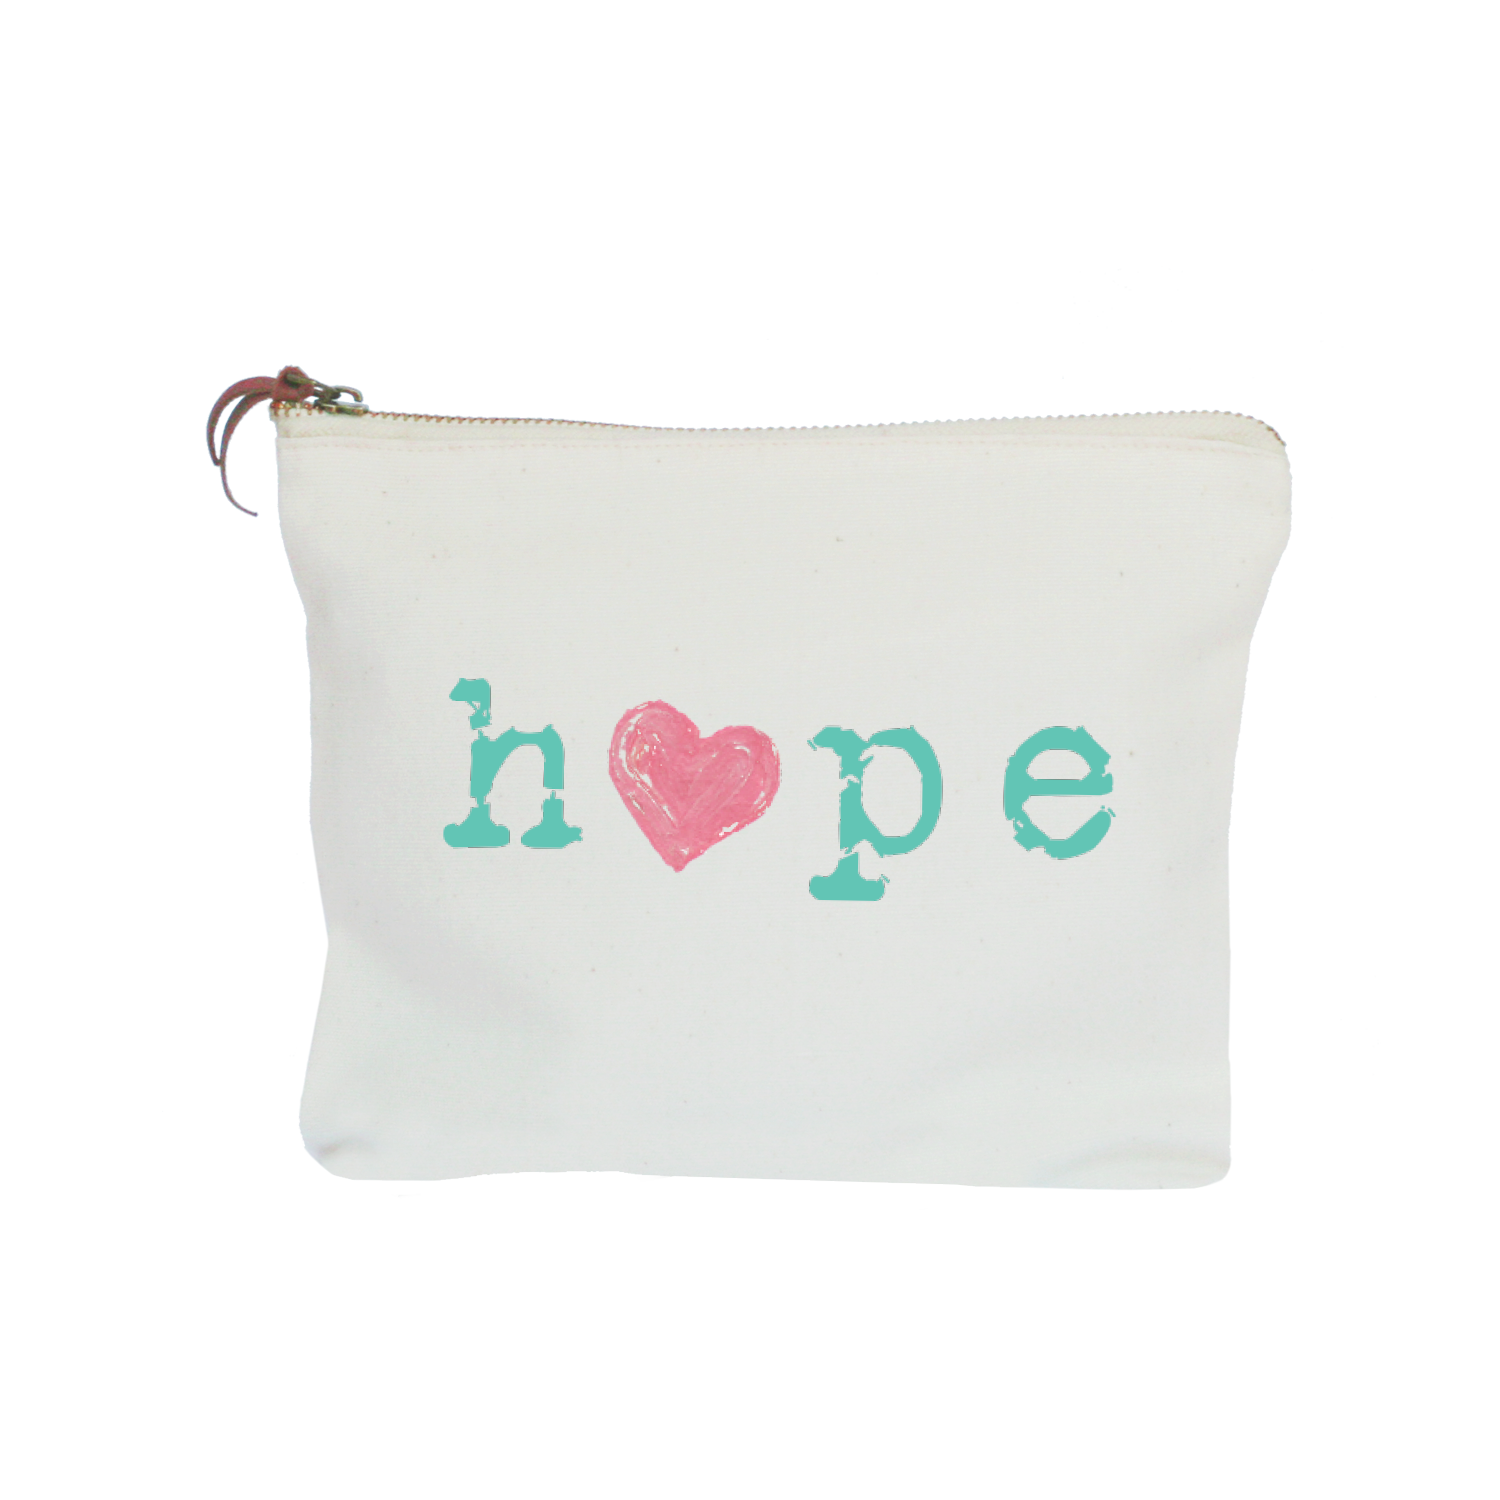 hope with heart zipper pouch